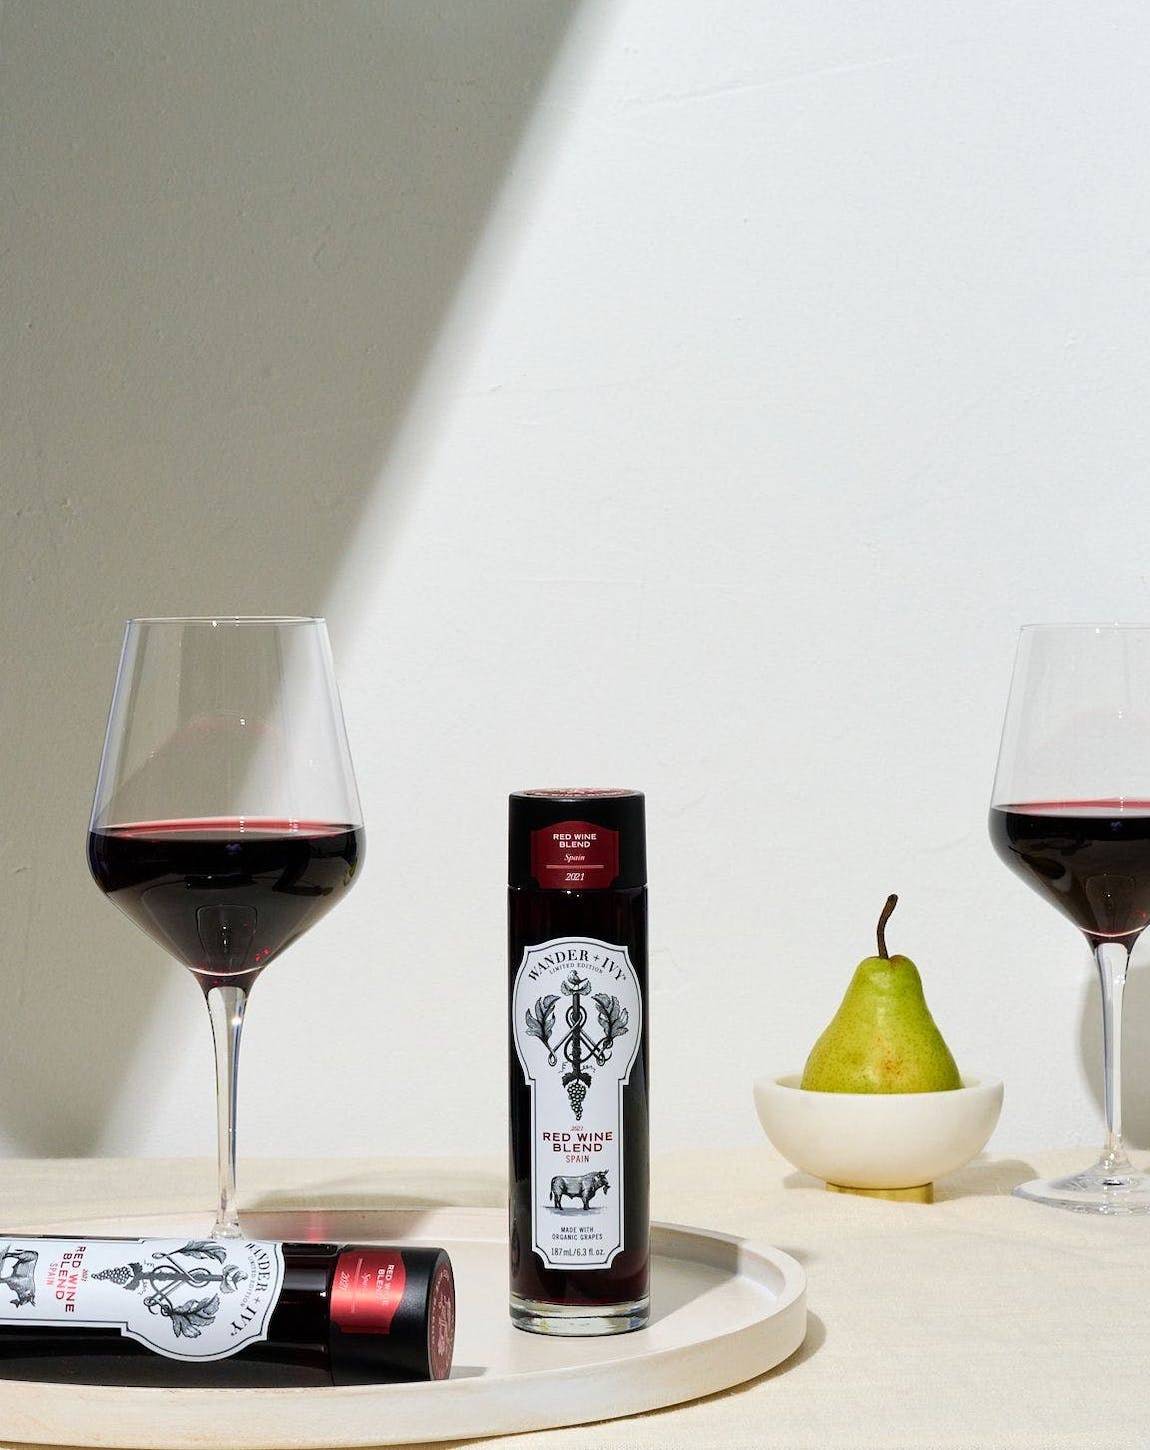 A display of single-serve bottles of Red Wine Blend on a tray with a wine-filled glass